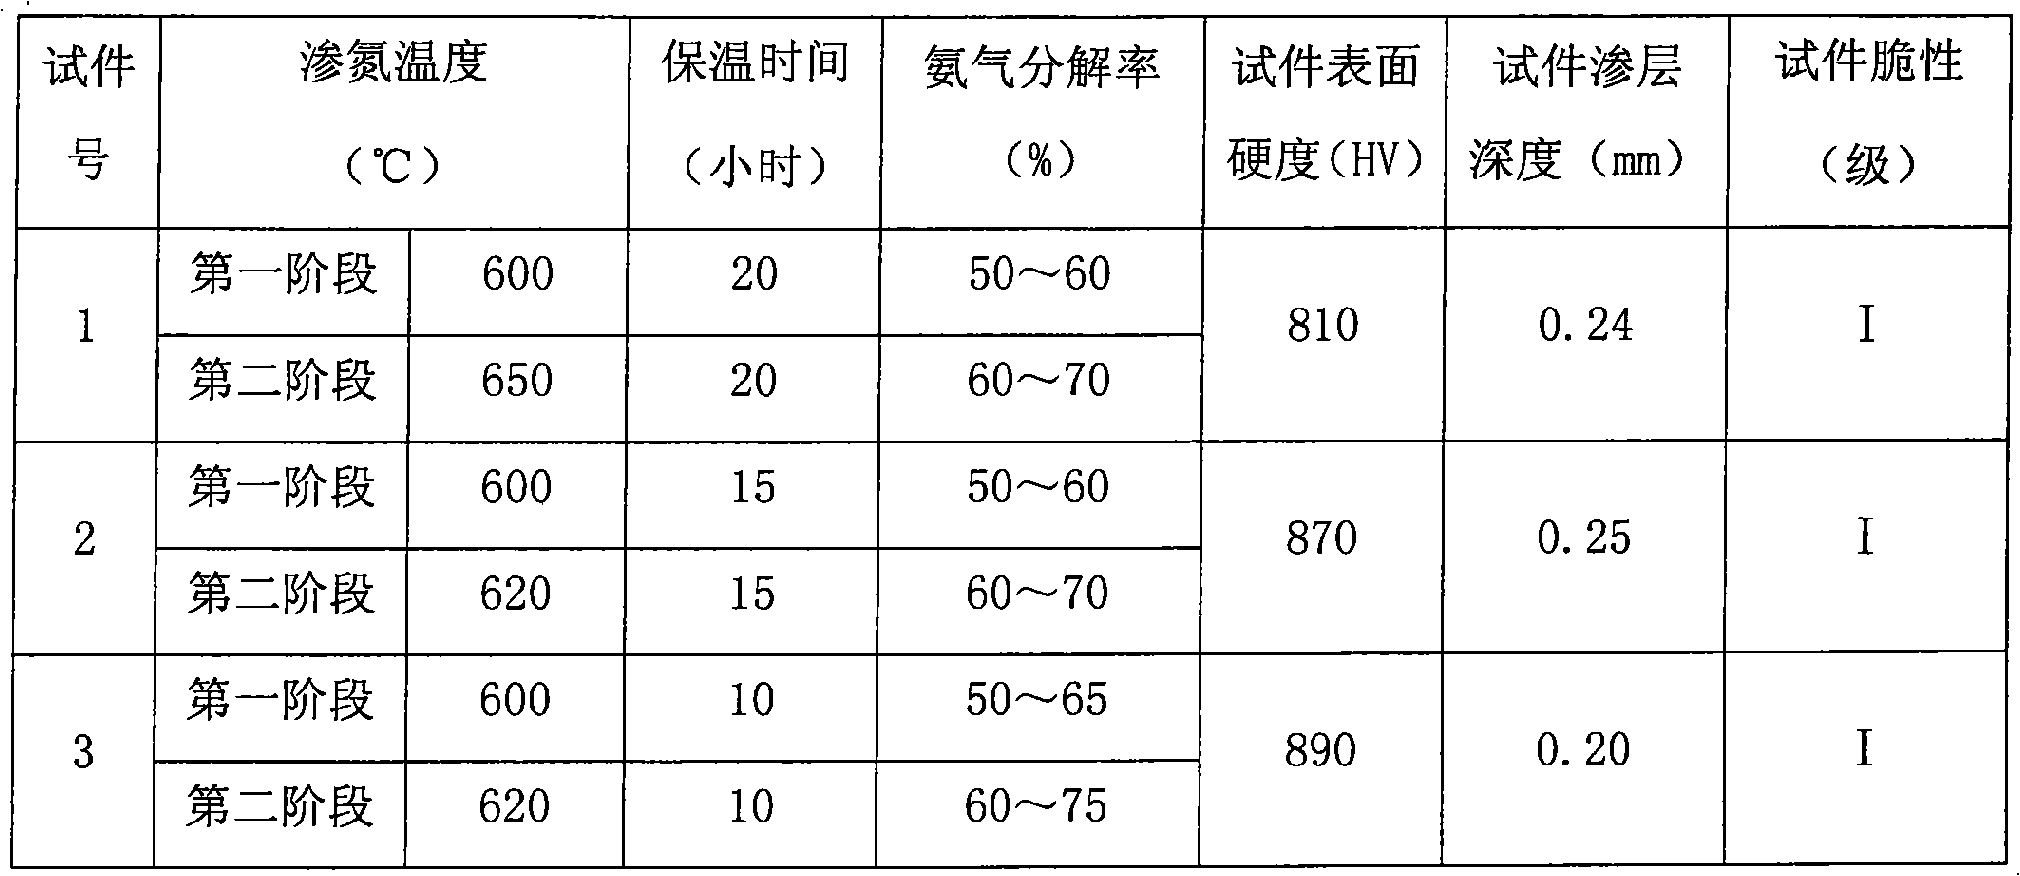 Process method for nitriding austenitic stainless steel material